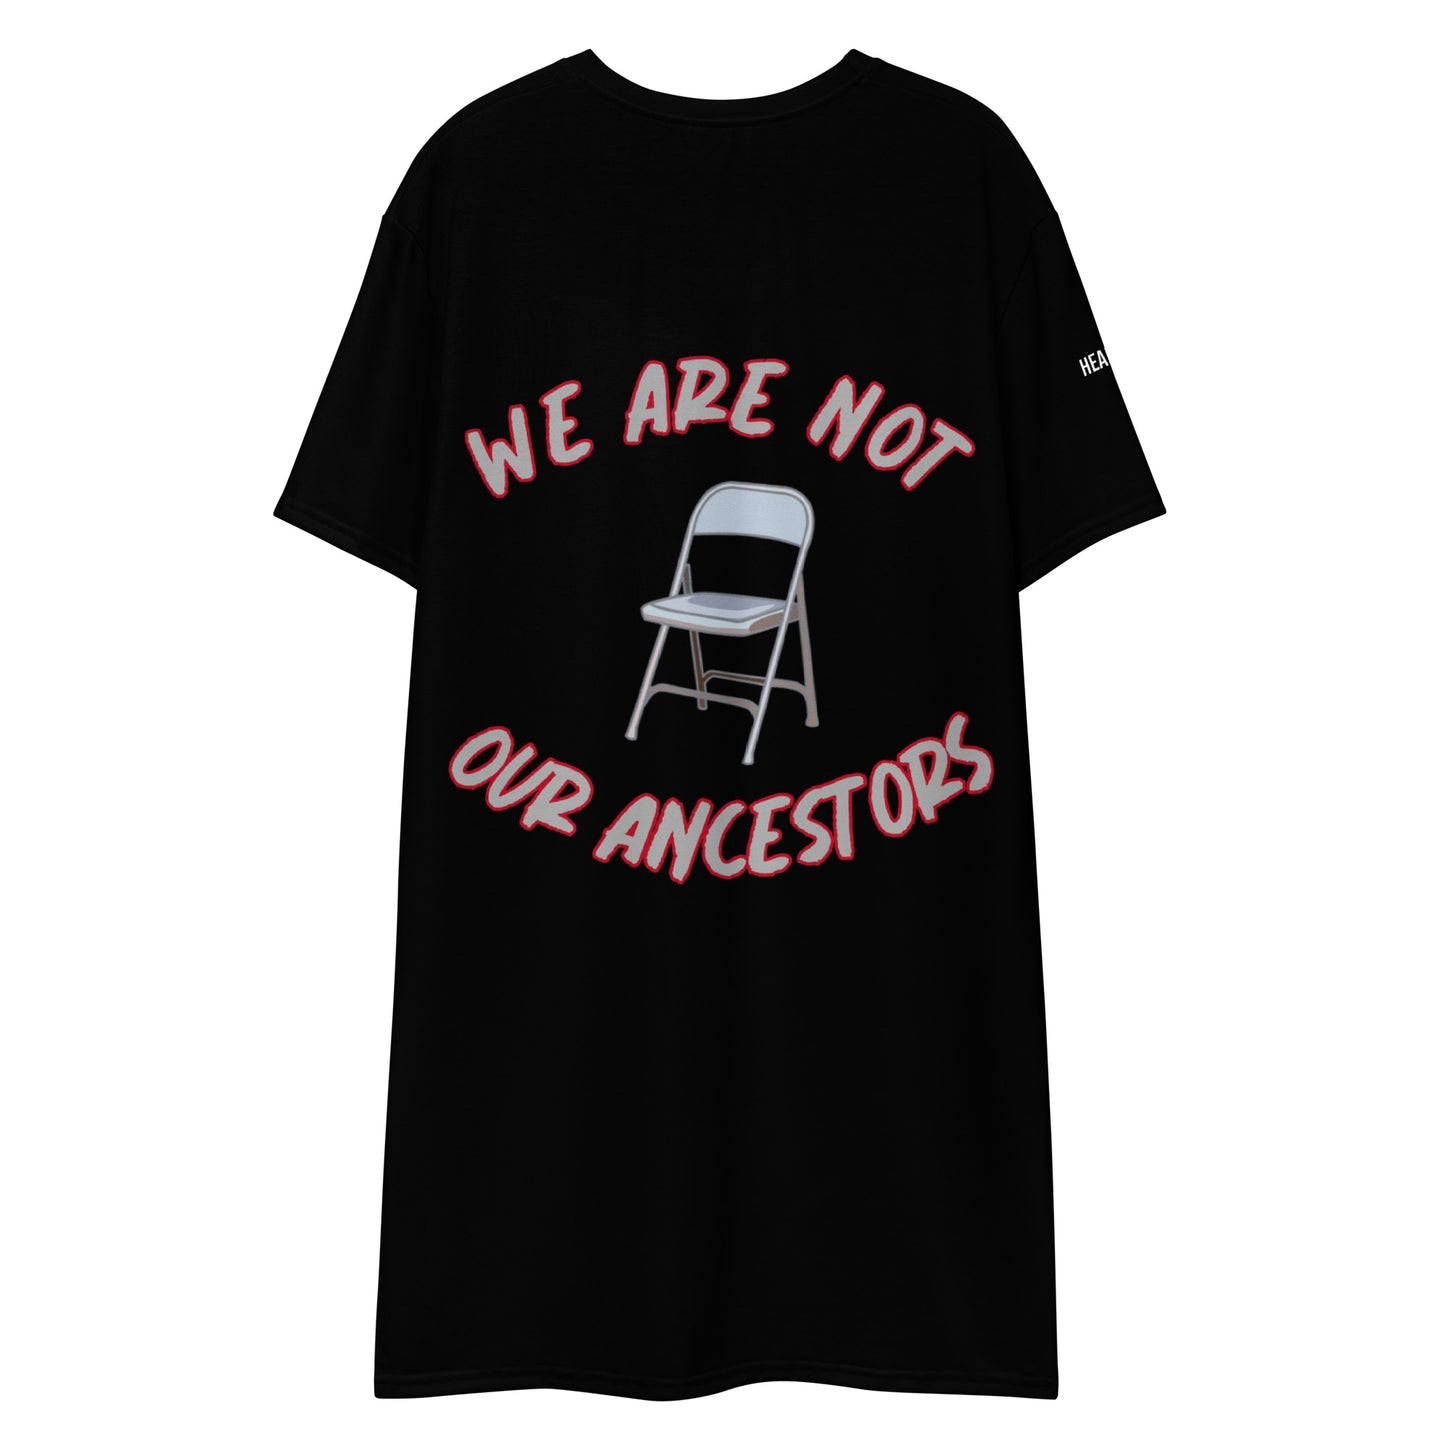 Stay Ready / We Are Not Our Ancestors T-Shirt Dress